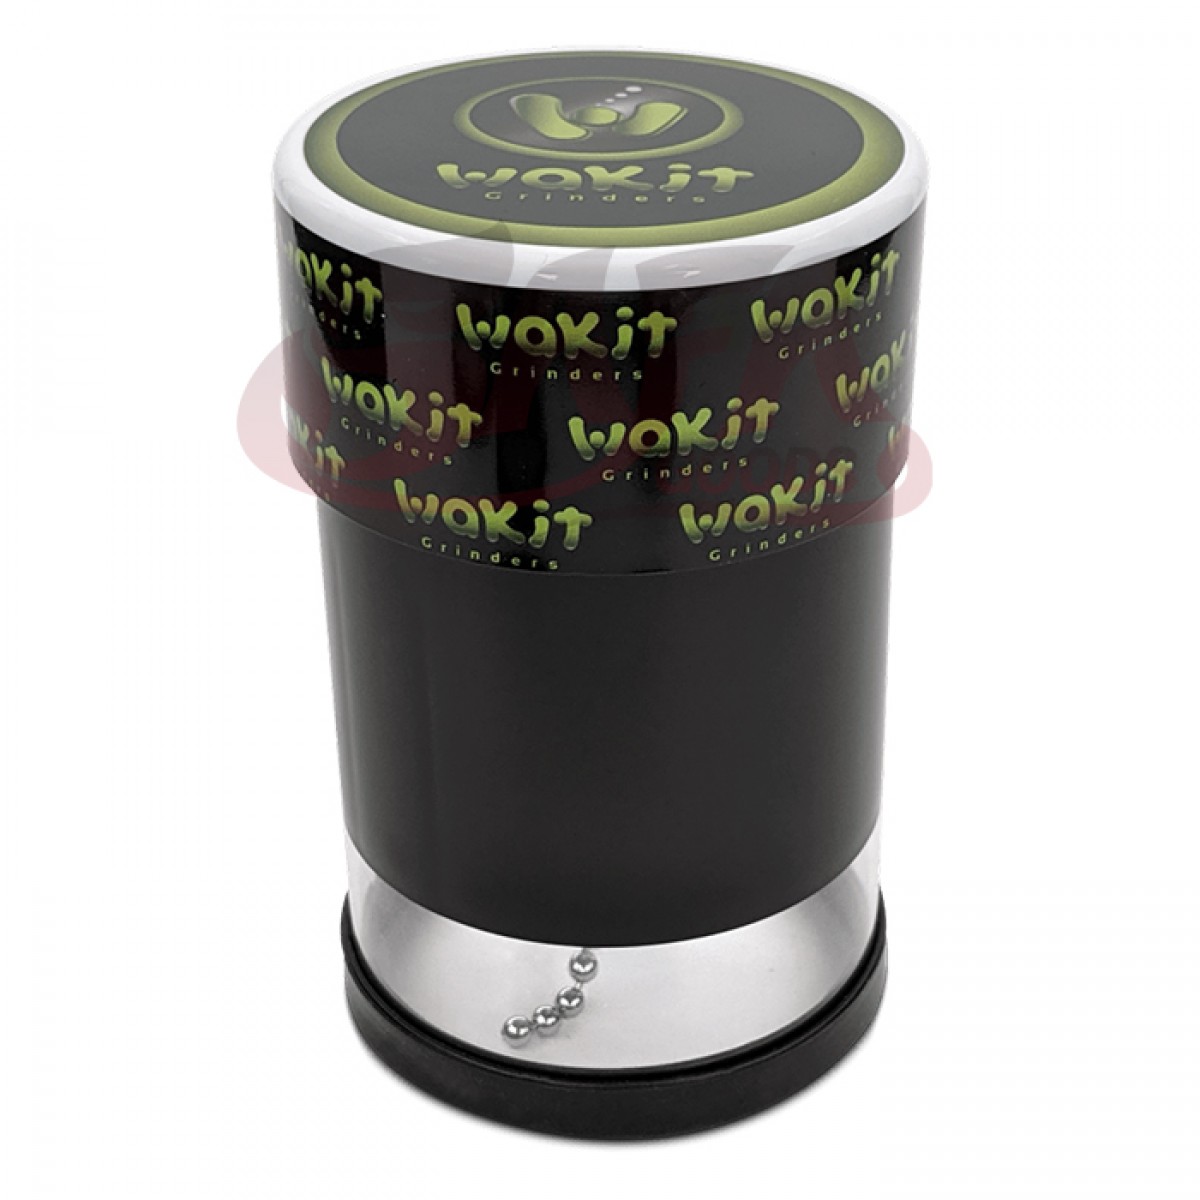 Wakit Electric Grinders